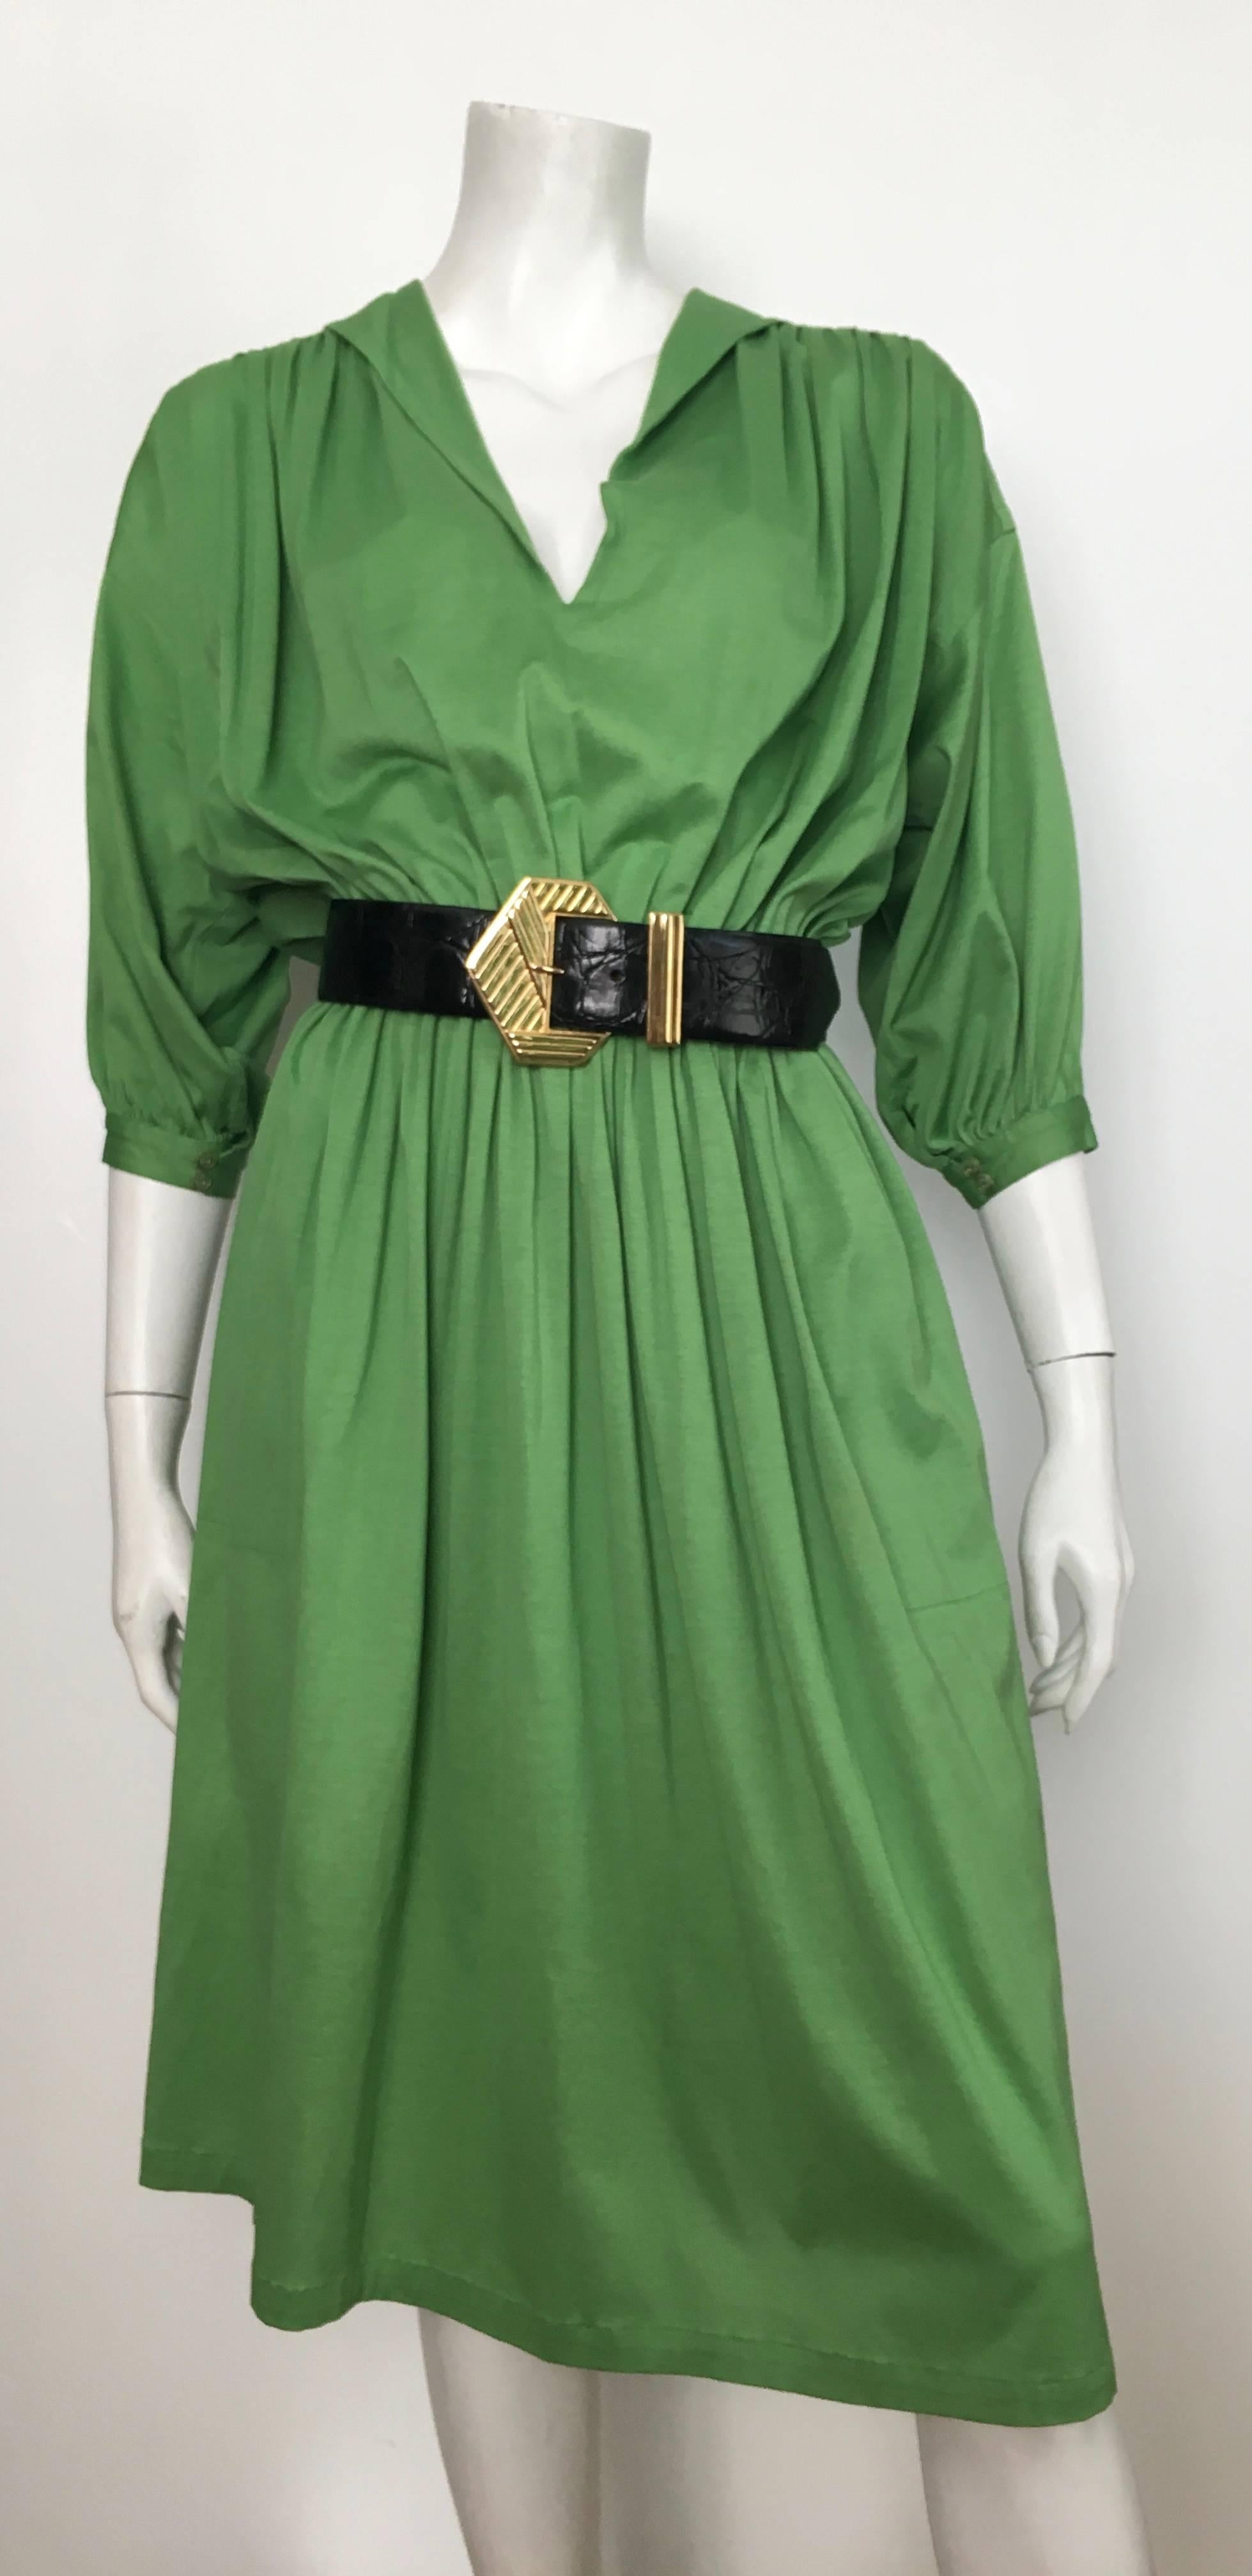 Missoni 1980s green cotton short sleeve casual day dress with pockets is a size small.  This dress is photographed on Matilda the Mannequin and she is a size 4 but since it has an elastic waistband it will go to a size 6.  Ladies please grab your